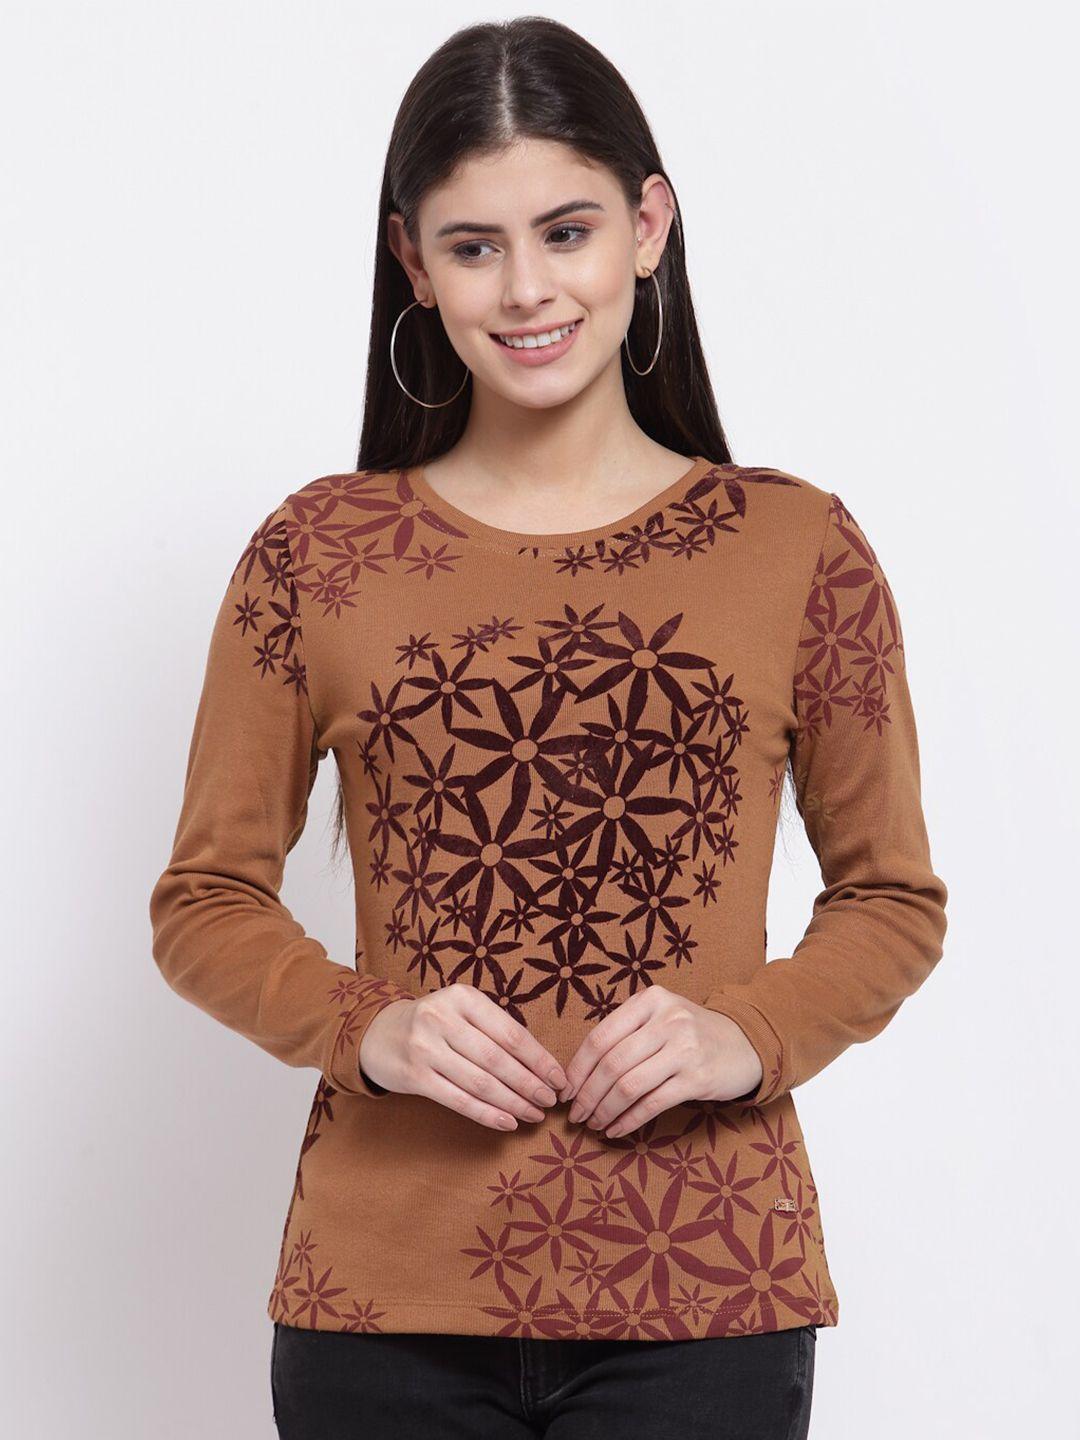 juelle women brown floral printed pullover sweater